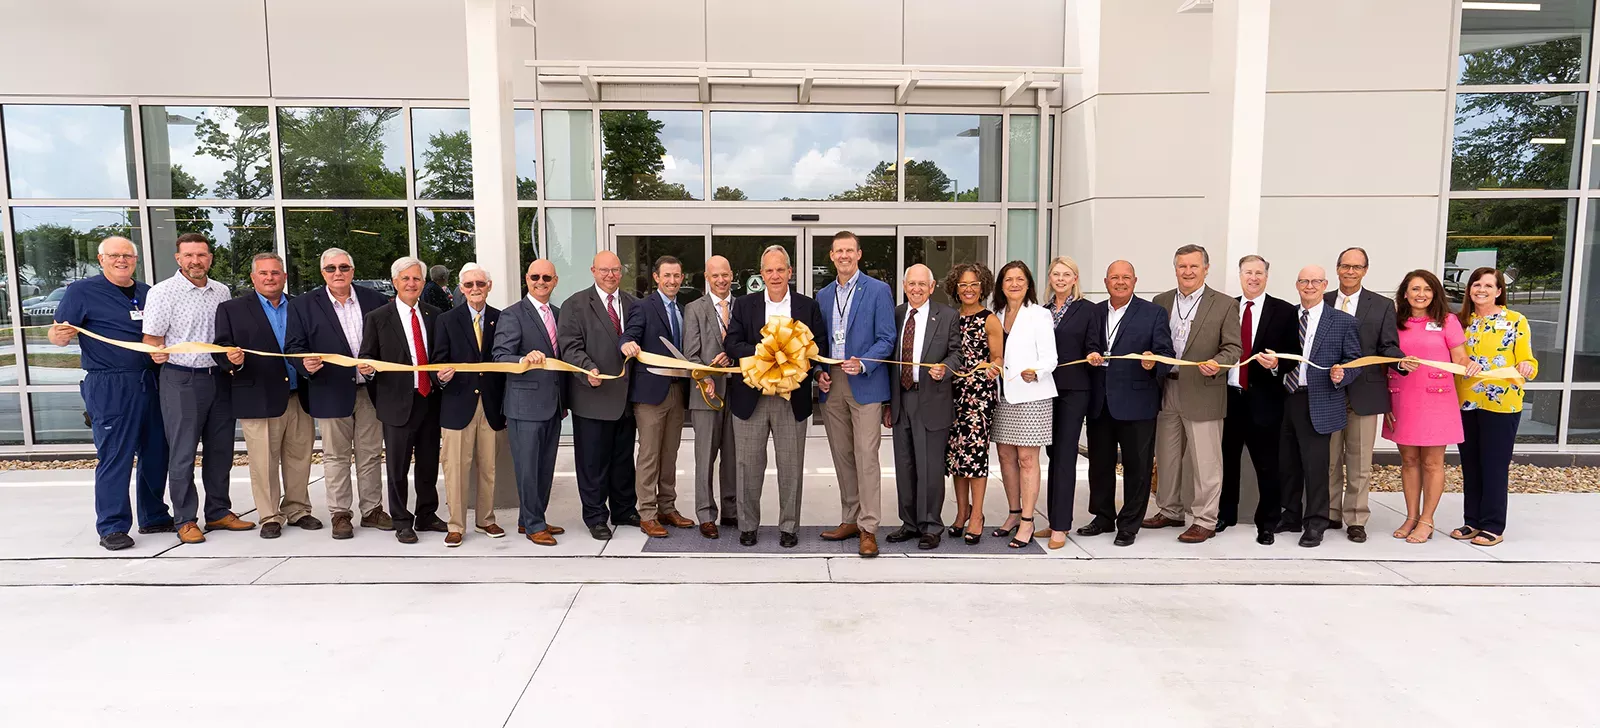 Ribbon cutting at the new Marshall Medical South Patient Tower and Hospital Entrance